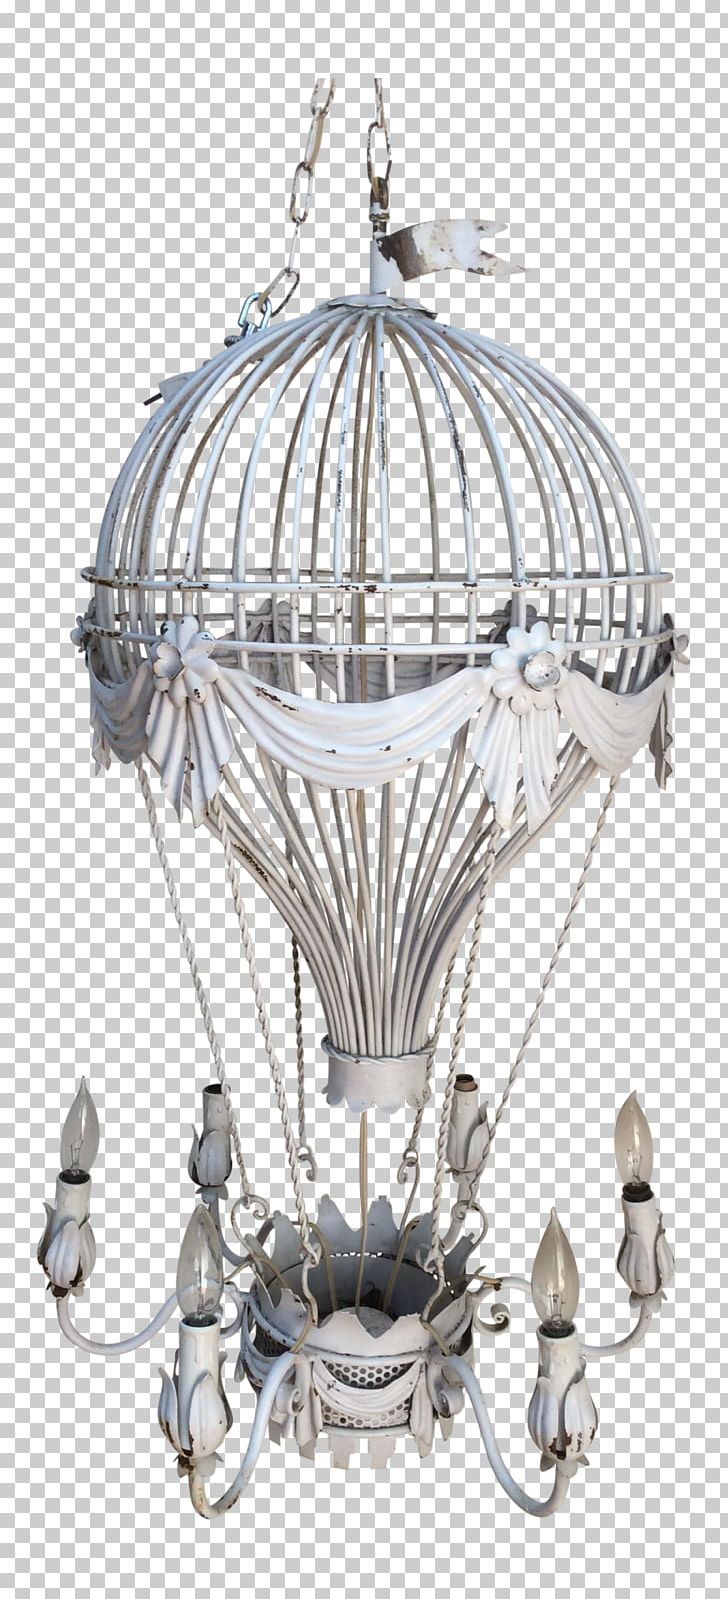 Chandelier Hot Air Balloon Electric Light Montgolfier Brothers PNG, Clipart, Air Balloon, Balloon, Balloon Light, Ceiling, Ceiling Fixture Free PNG Download